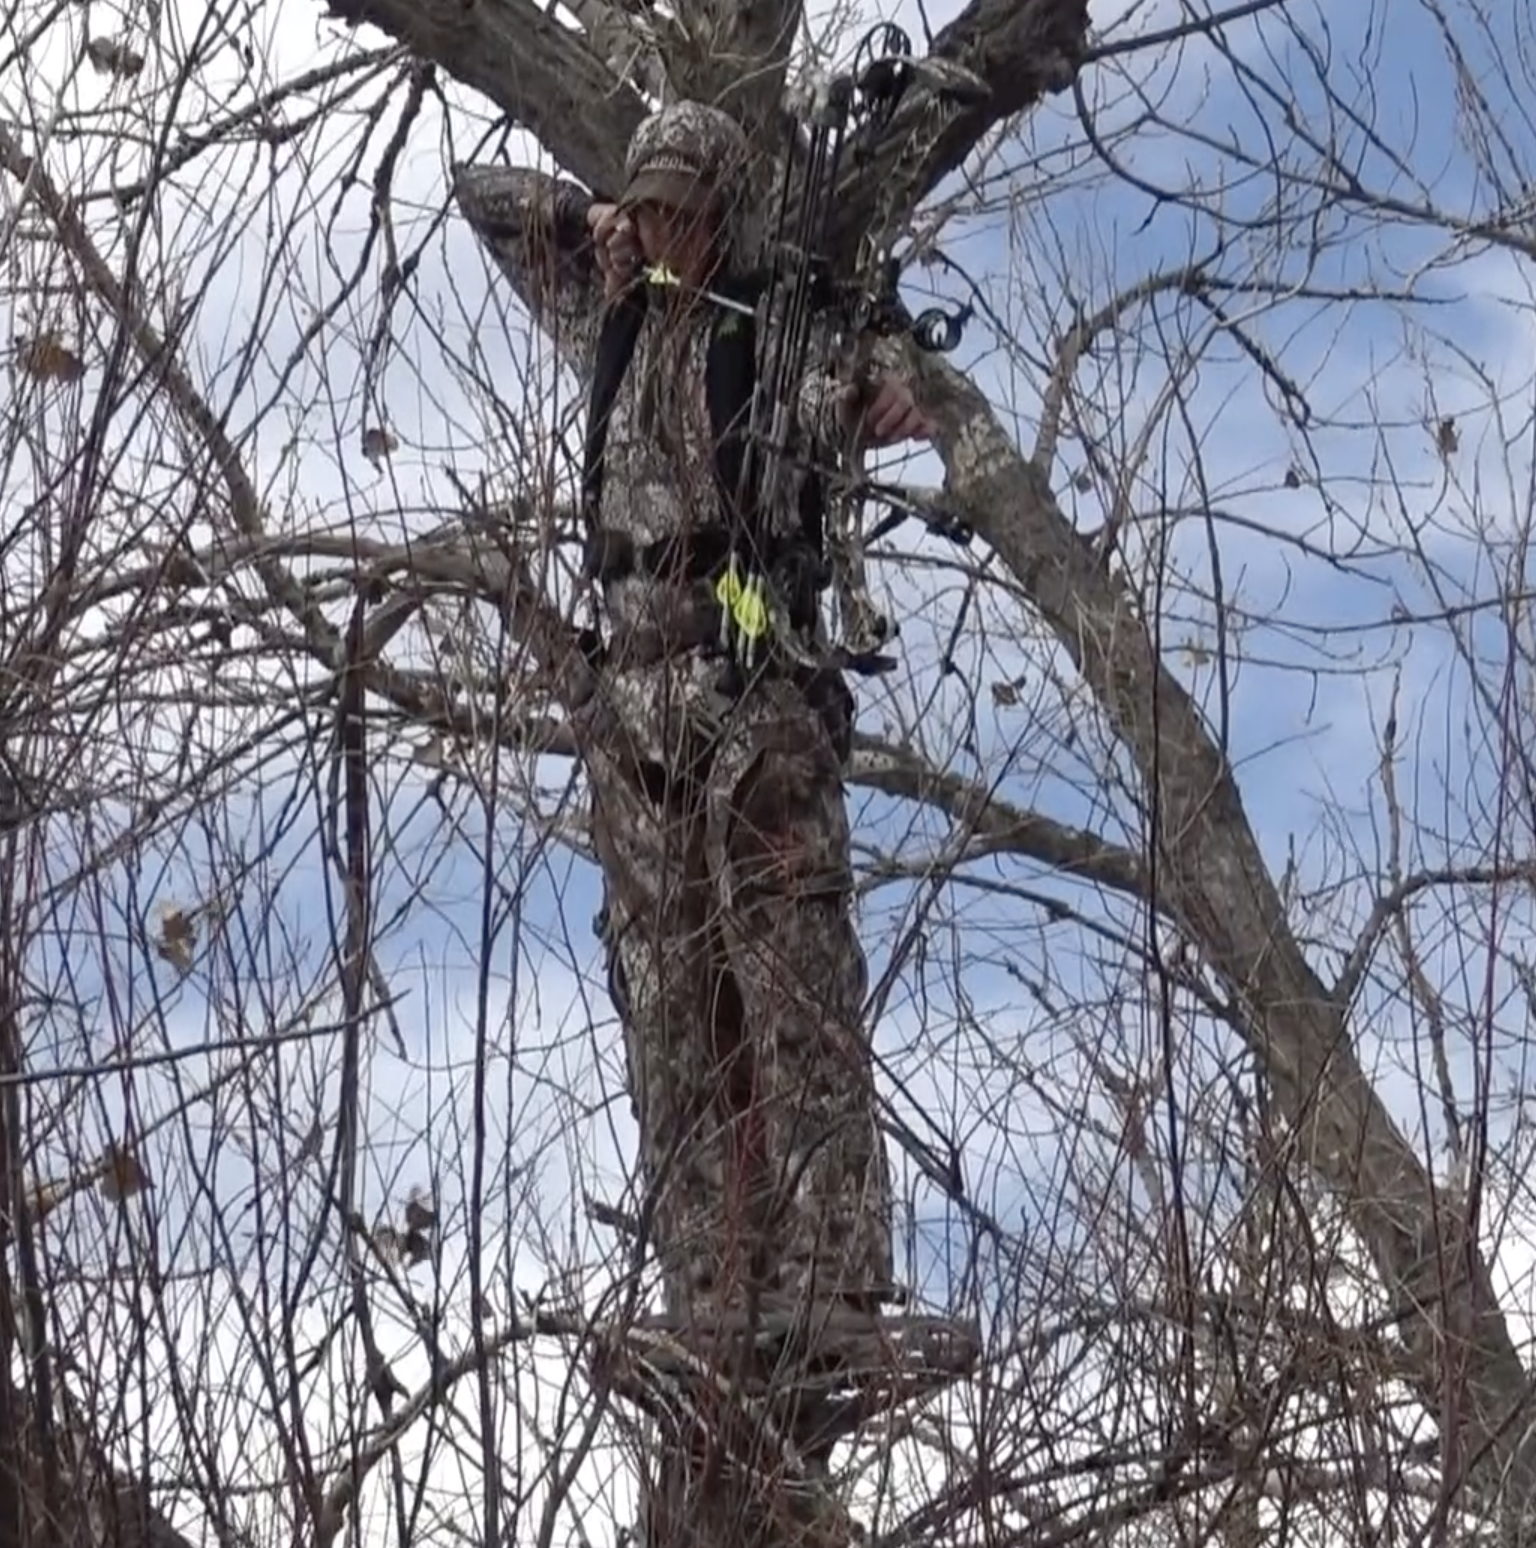 You can hunt western big game from a treestand.